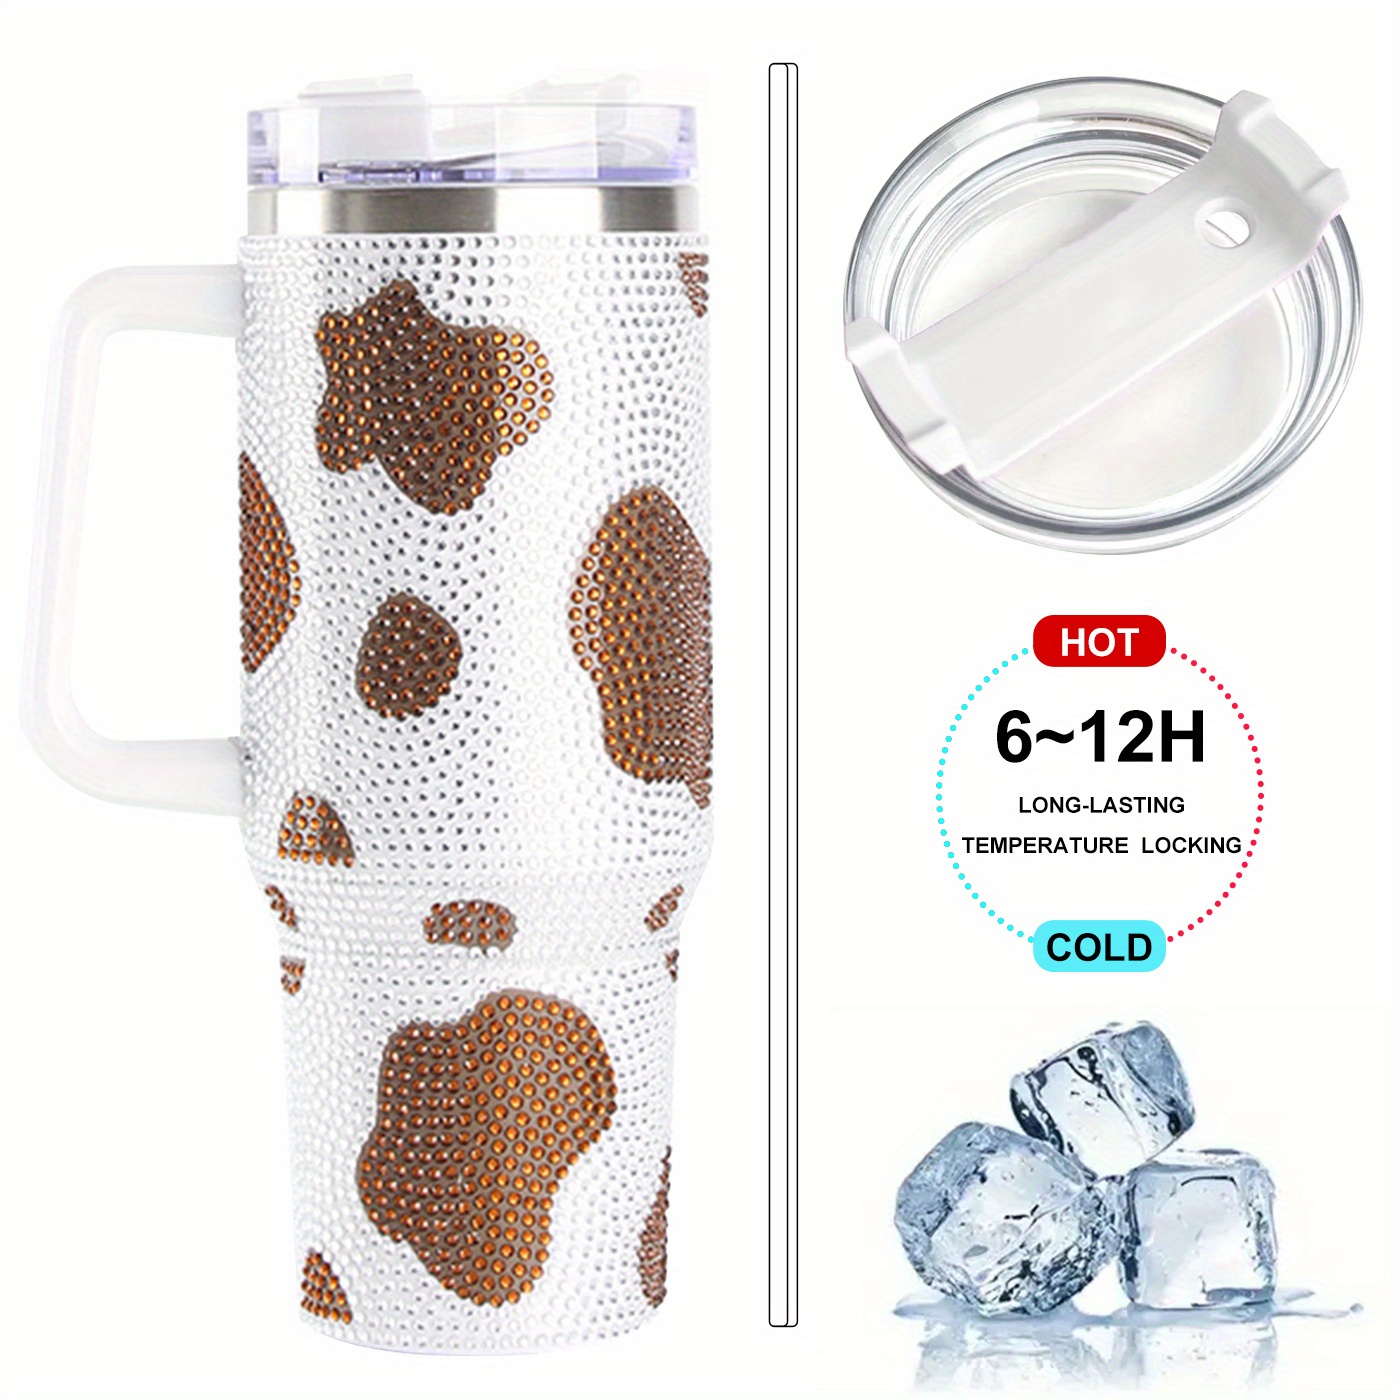 wonshia 40oz Cow print Tumbler With handle, Stainless Steel Tumbler With  Lid and Straws, Double Vacuum Leak Proof Travel Coffee Mug Cup Water Bottle